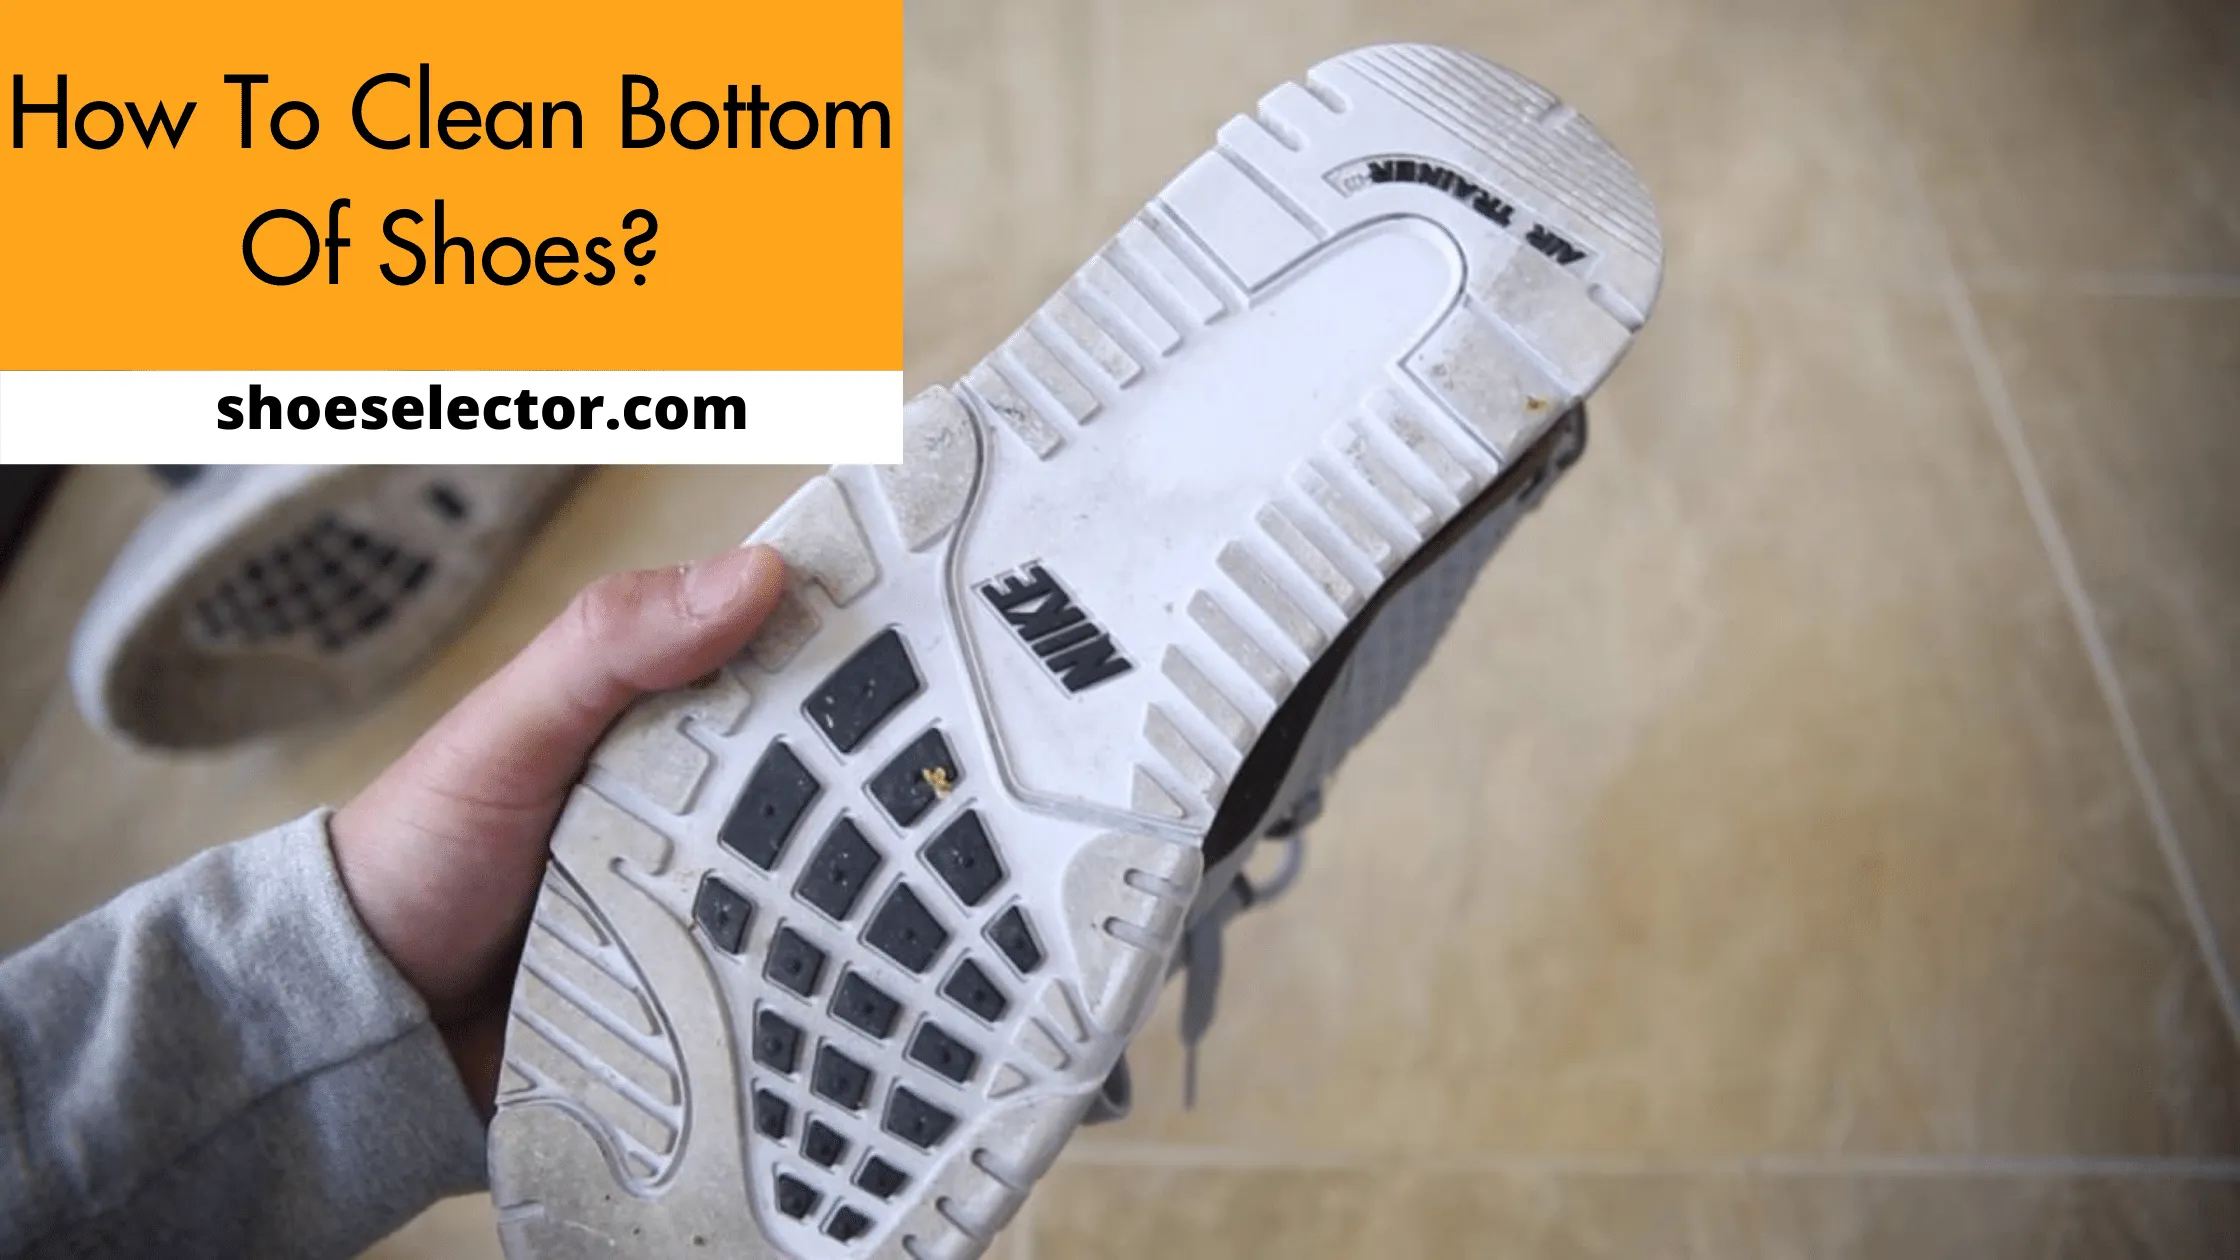 How To Clean Bottom Of Shoes? - #1 Solution